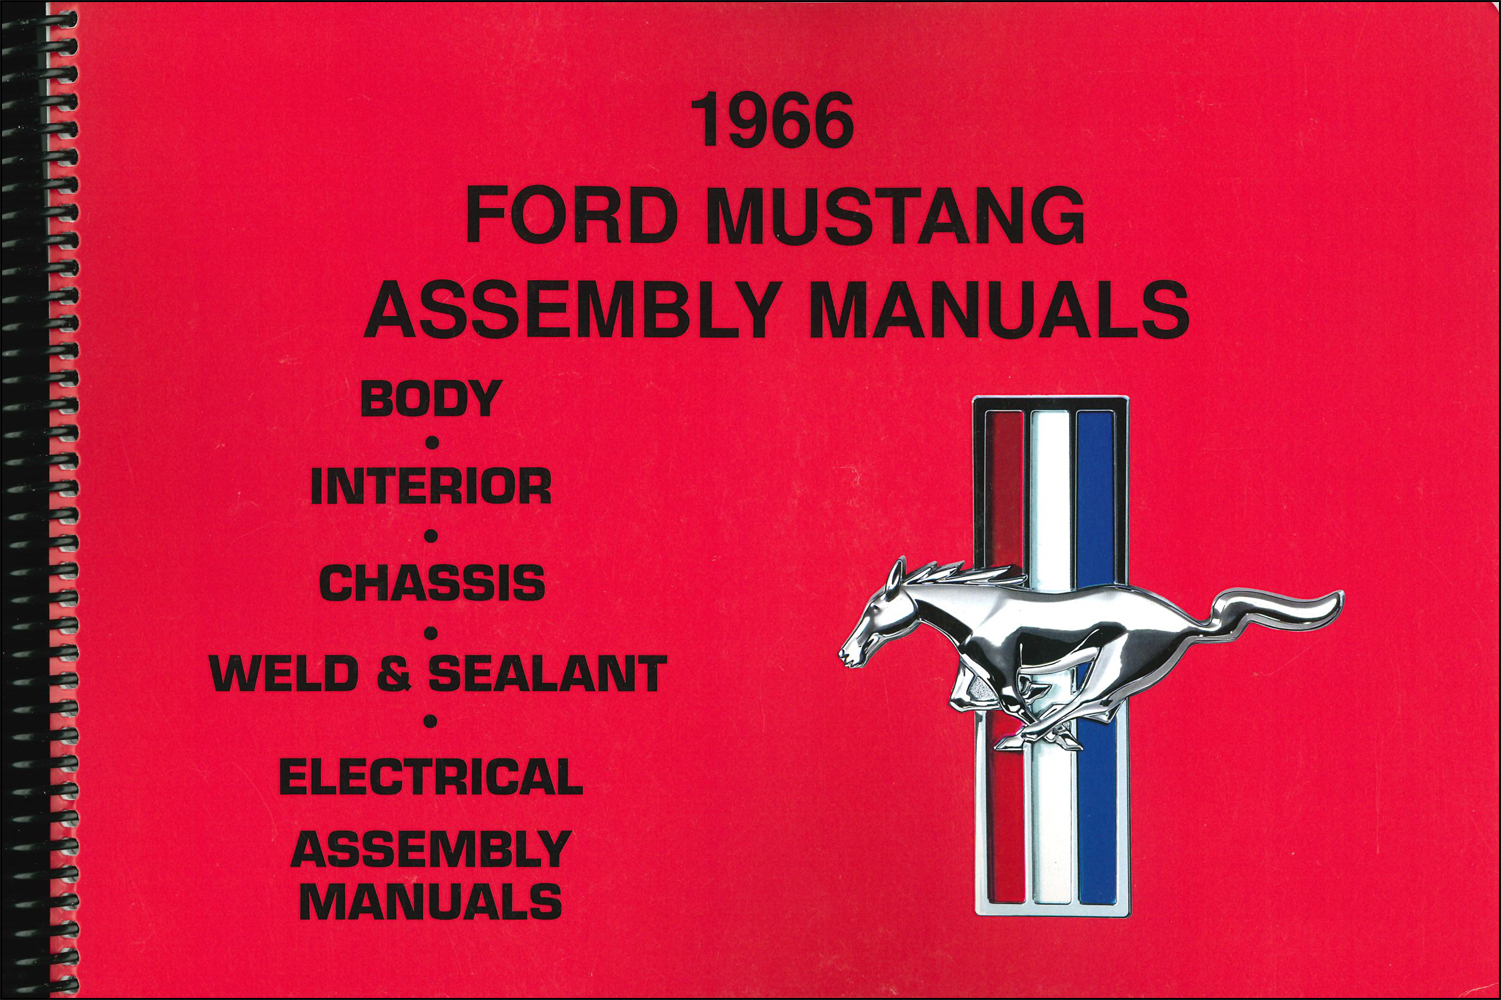 1966 Ford Mustang Exploded View Parts Illustration Manual Reprint